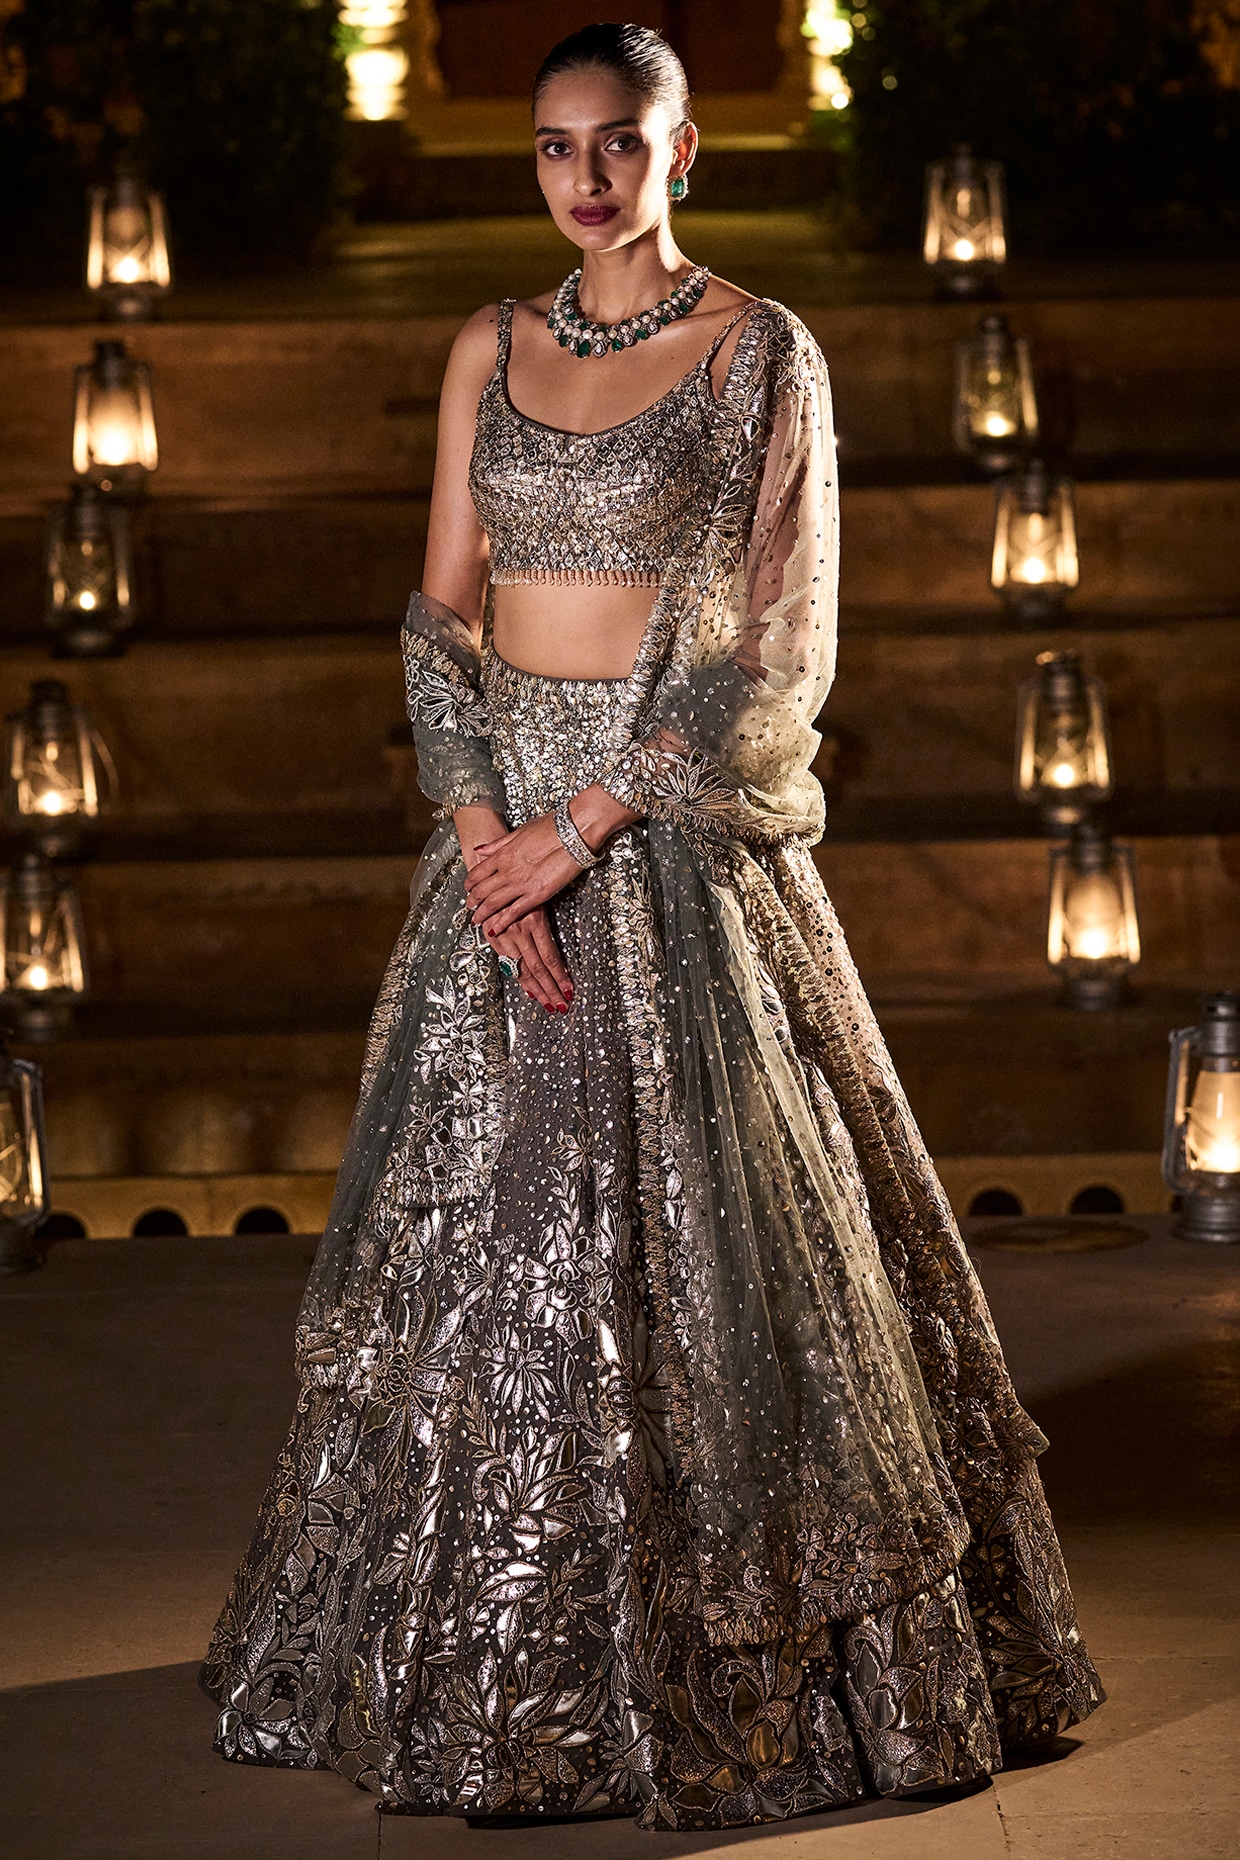 Ansab Jahangir - Malmaison rose metallic shimmer lehenga choli paired with  a scalloped dupatta. For more details, kindly inbox or call/whatsapp us at  +92-309-9999663 #ansabjahangir #ansabjahangirstudio #DIA  #DIAbyansabjahangir #ajbridals #Bridals ...